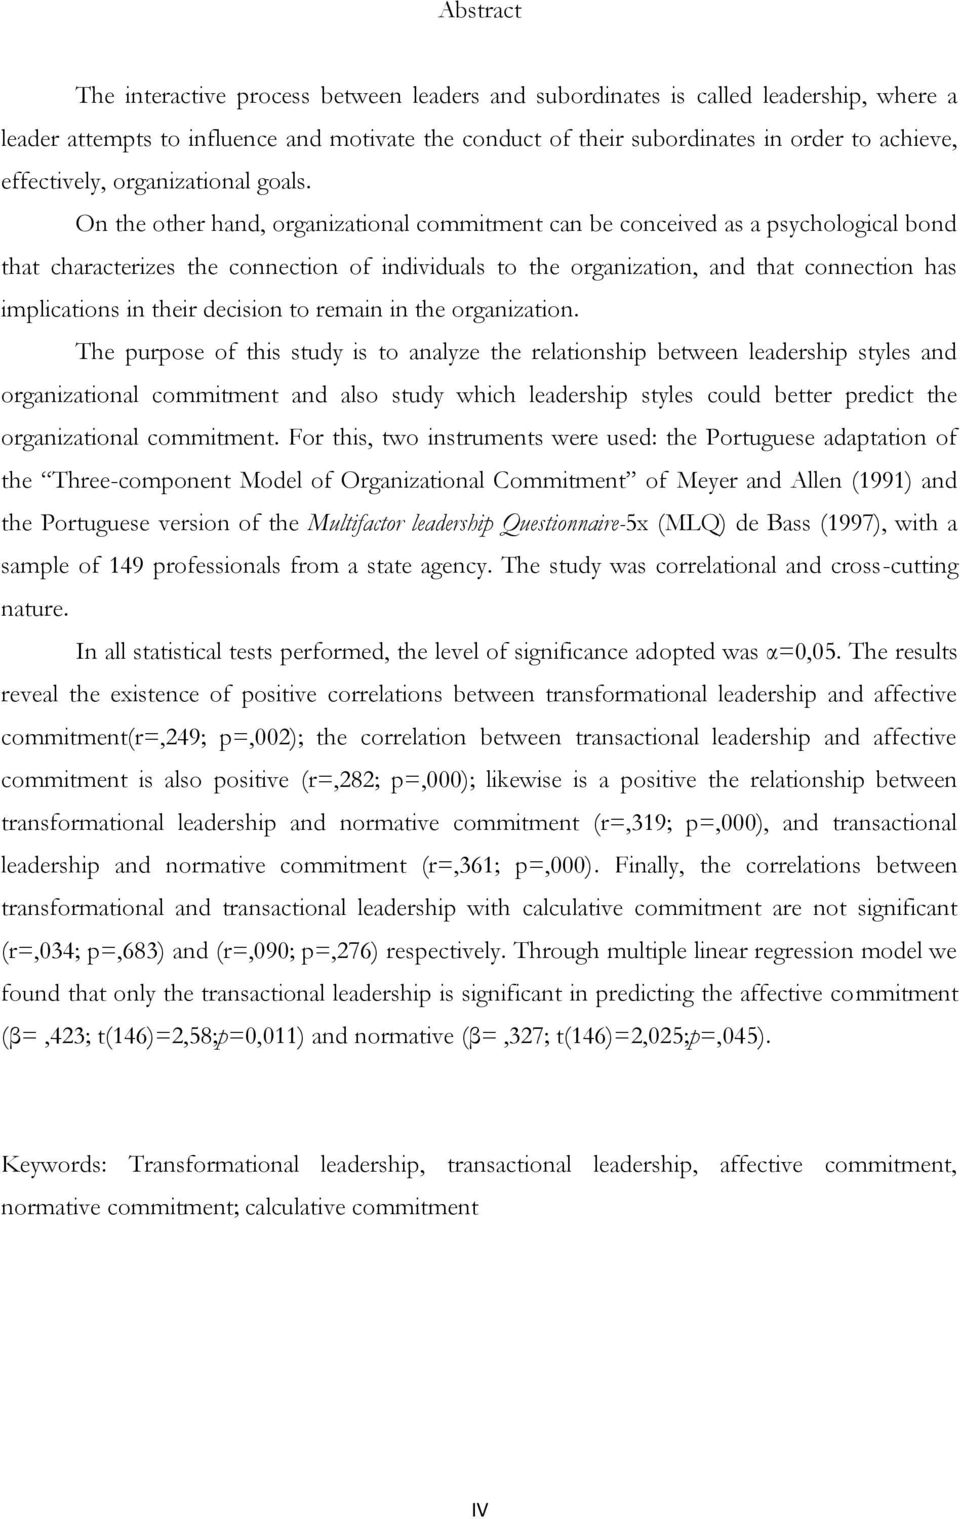 On the other hand, organizational commitment can be conceived as a psychological bond that characterizes the connection of individuals to the organization, and that connection has implications in